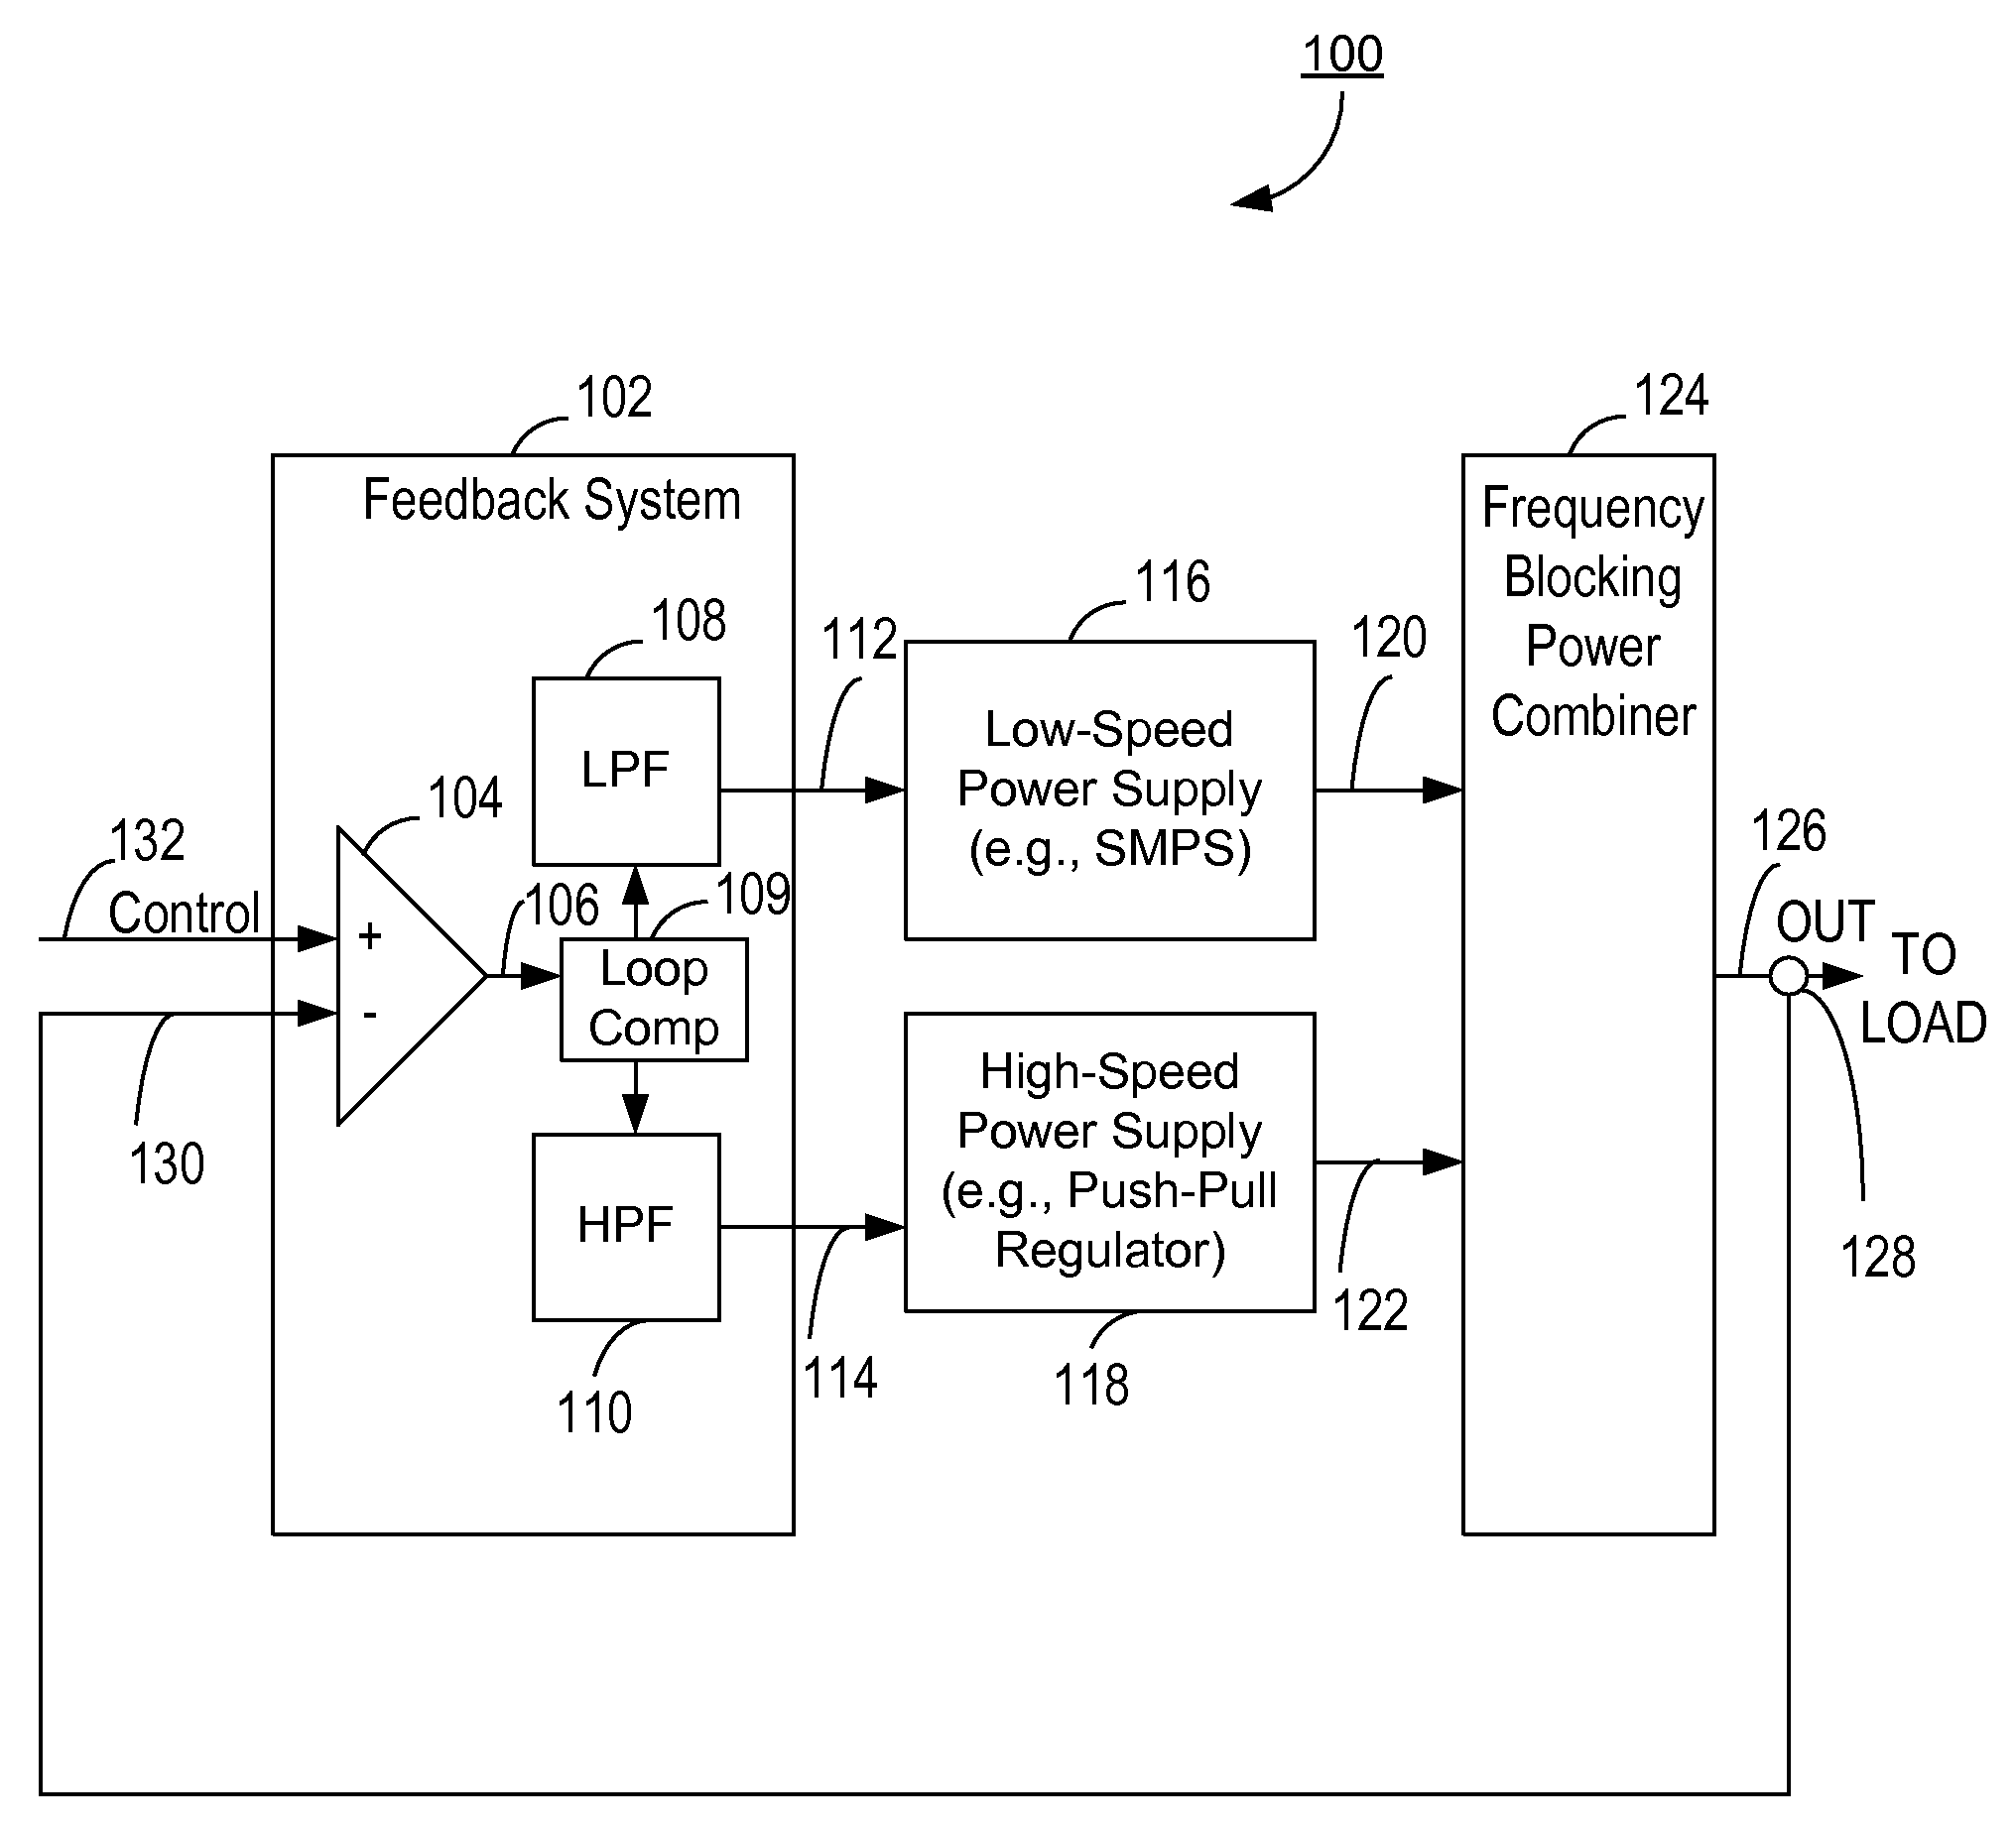 Power combining power supply system